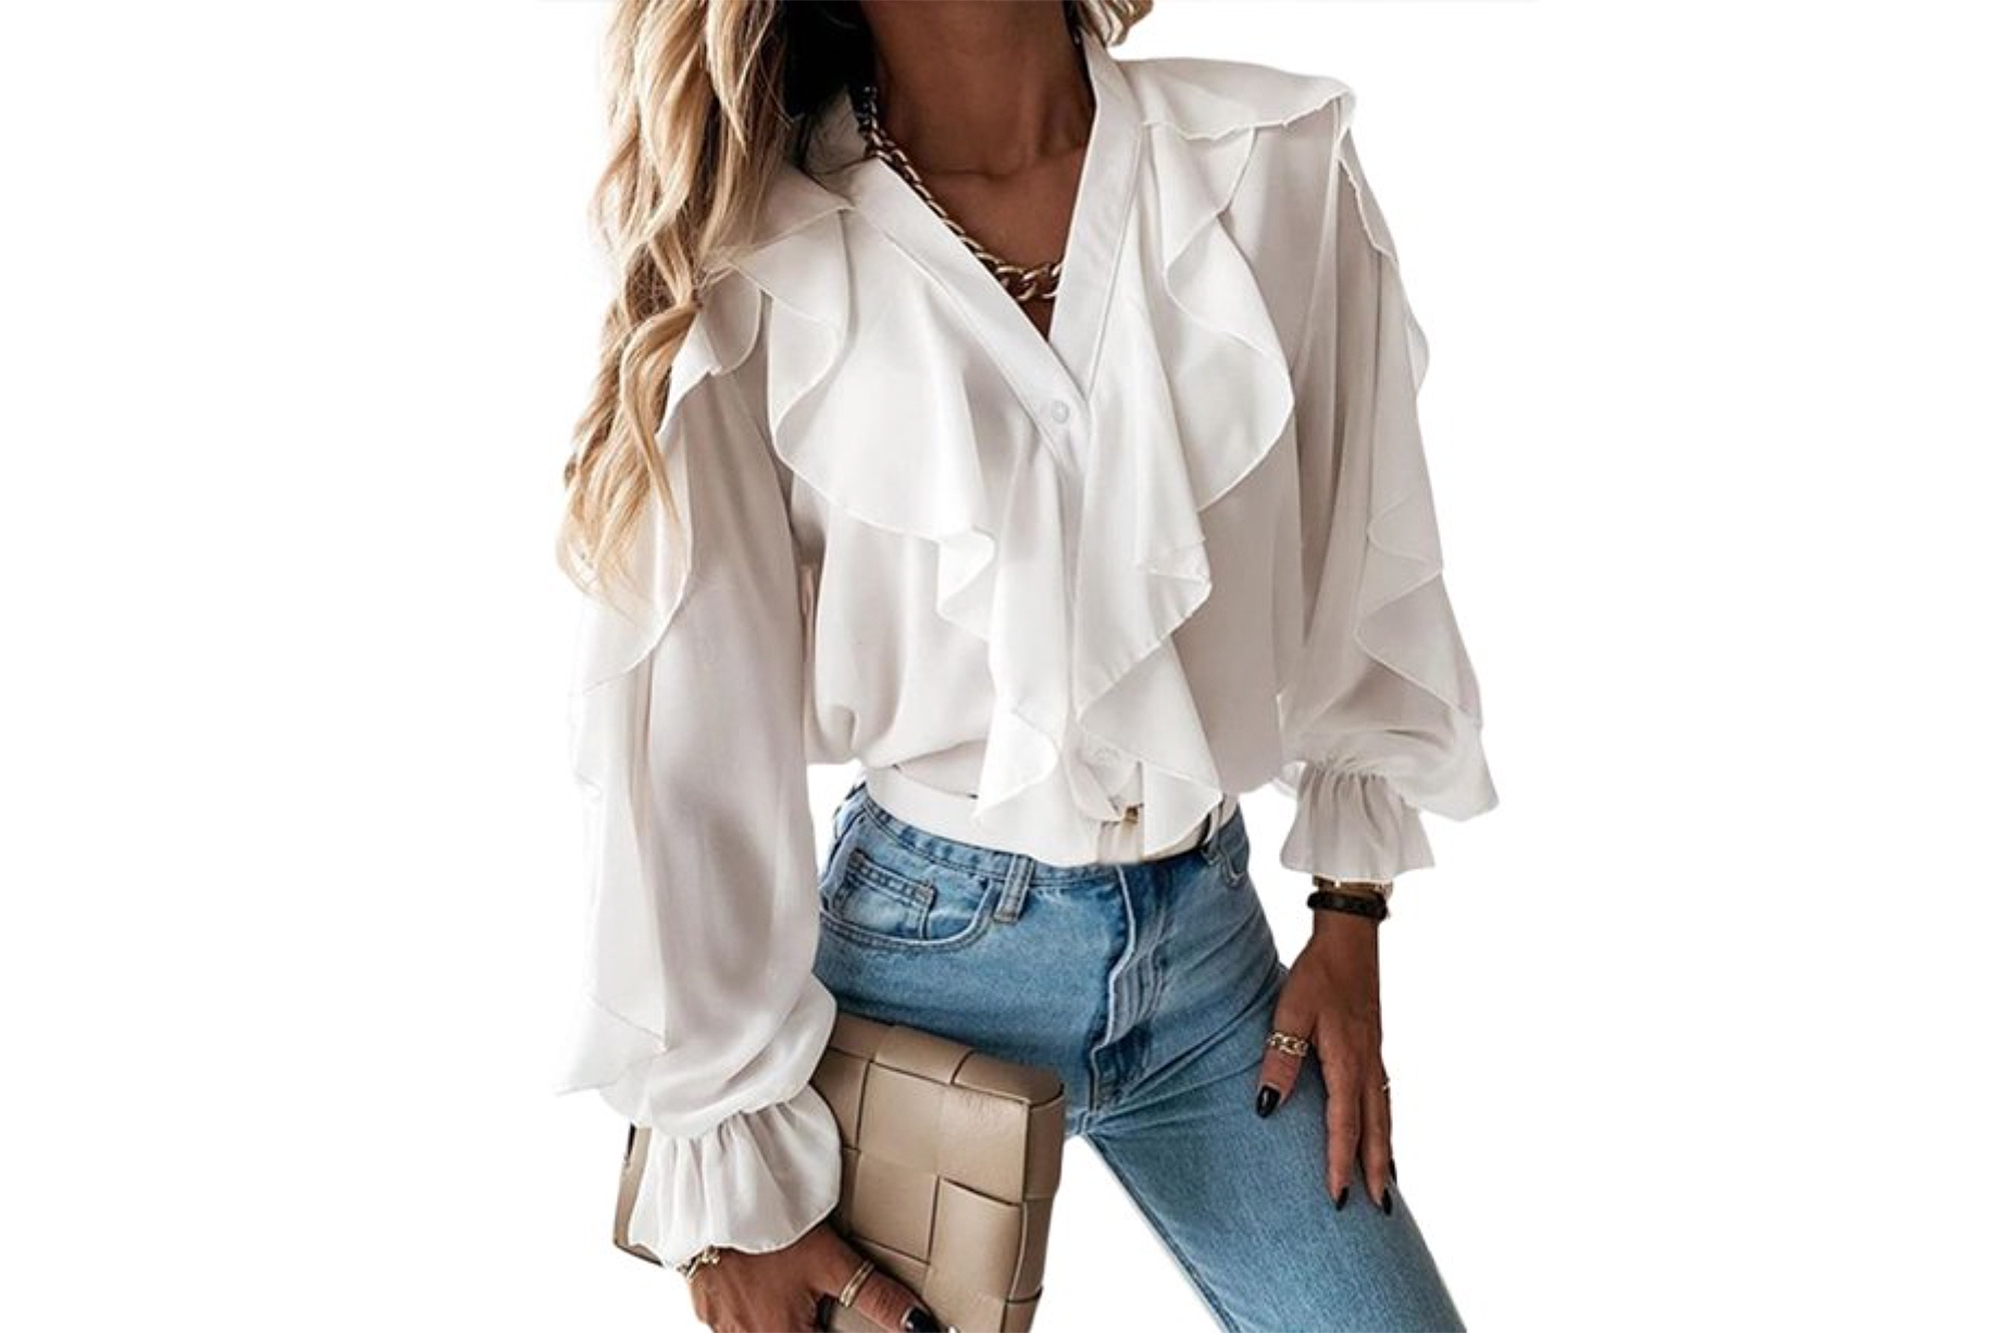 Celmia Blouse Has All of the Romantic Ruffles in the World | UsWeekly